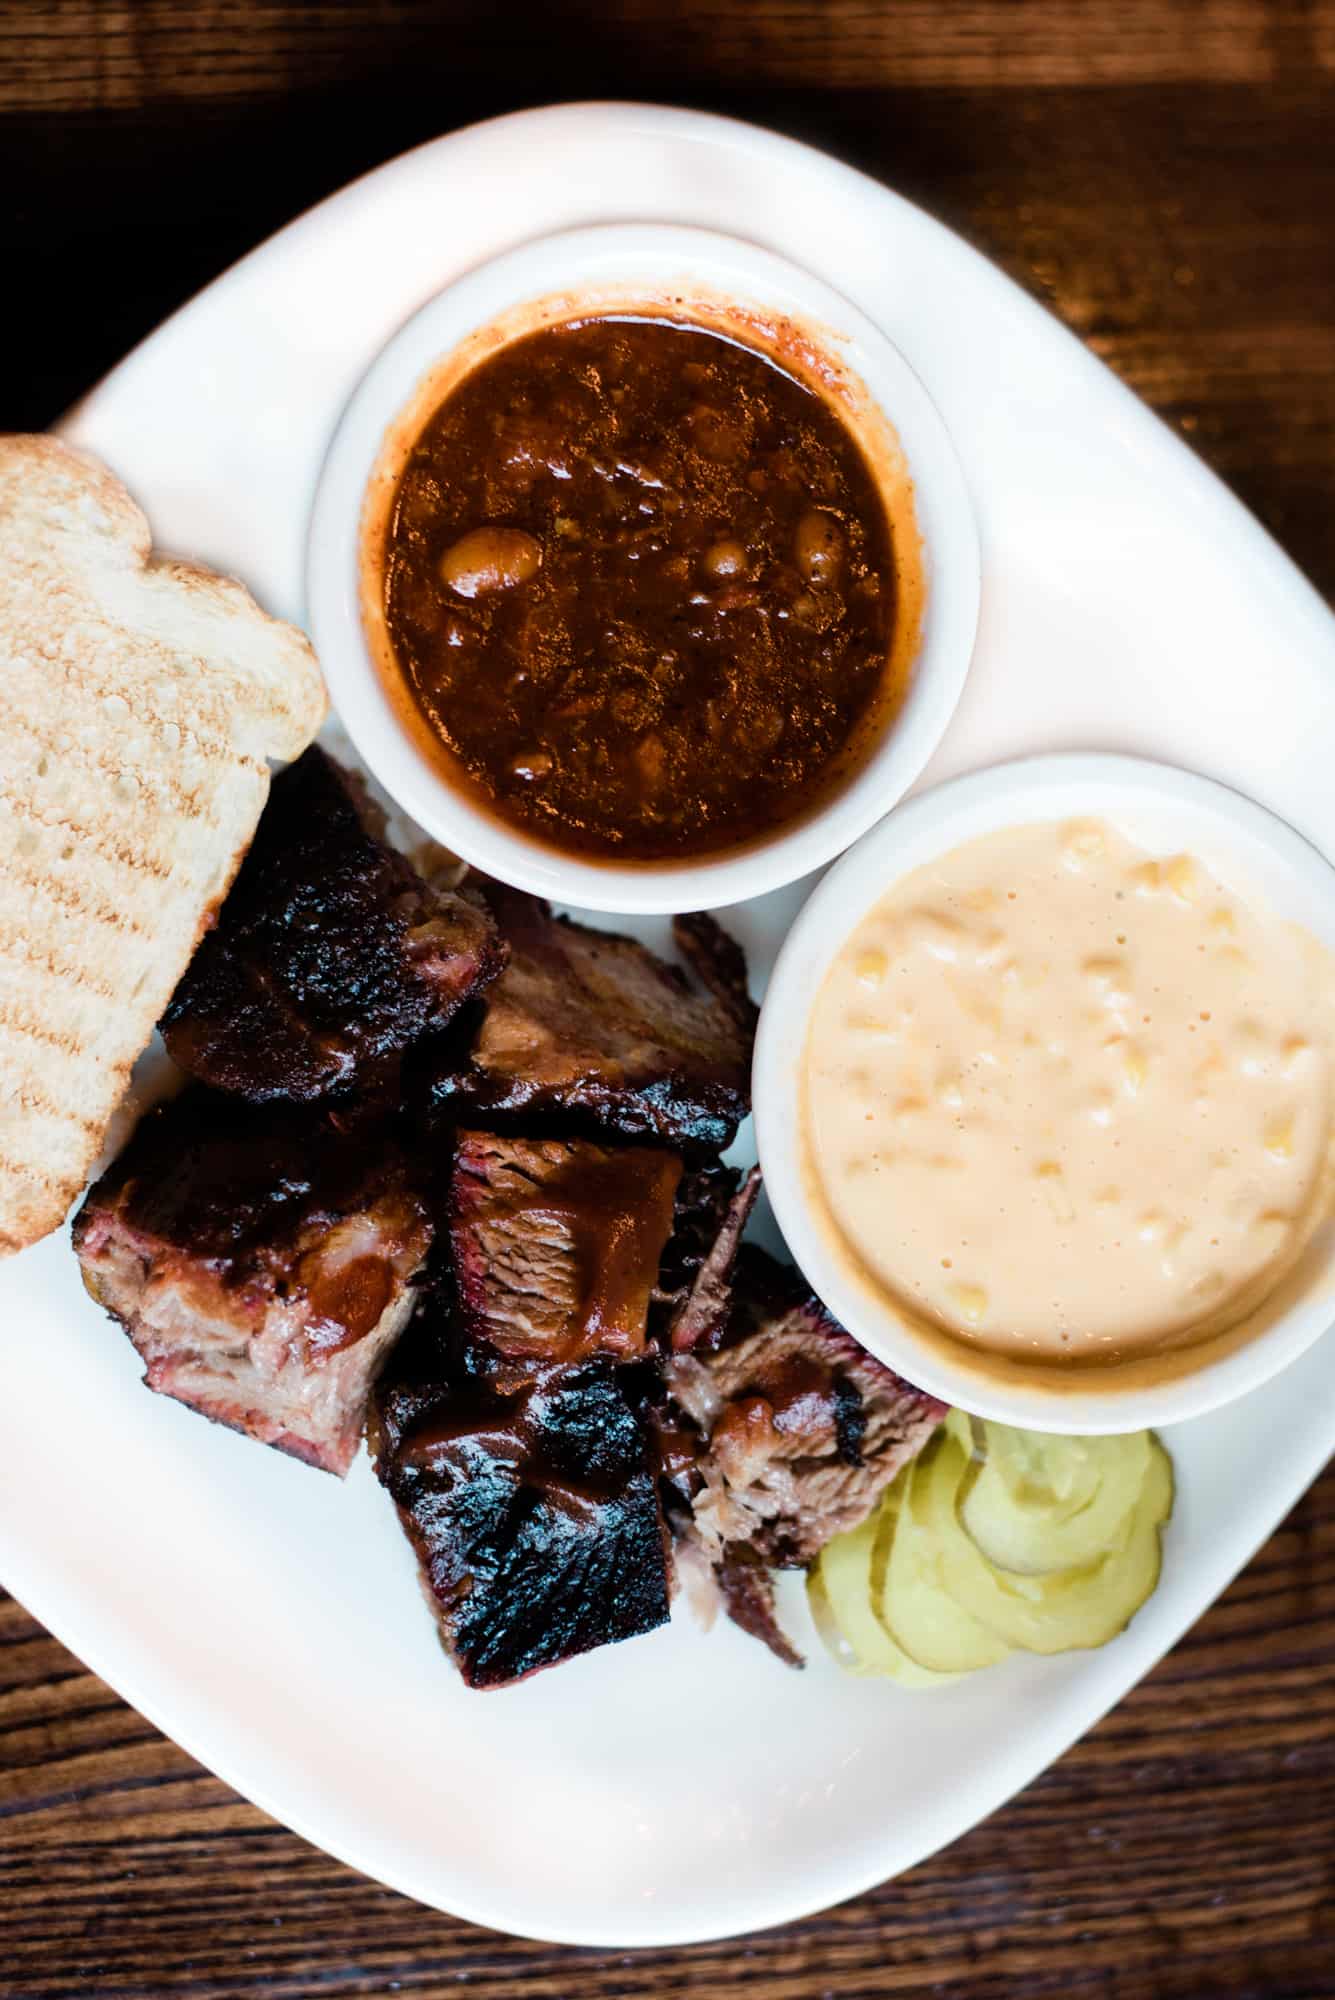 Kansas City is a mecca for barbecue fanatics. If you're visiting Kansas City, here's the top 5 Kansas City barbecue restaurants you won't want to miss.